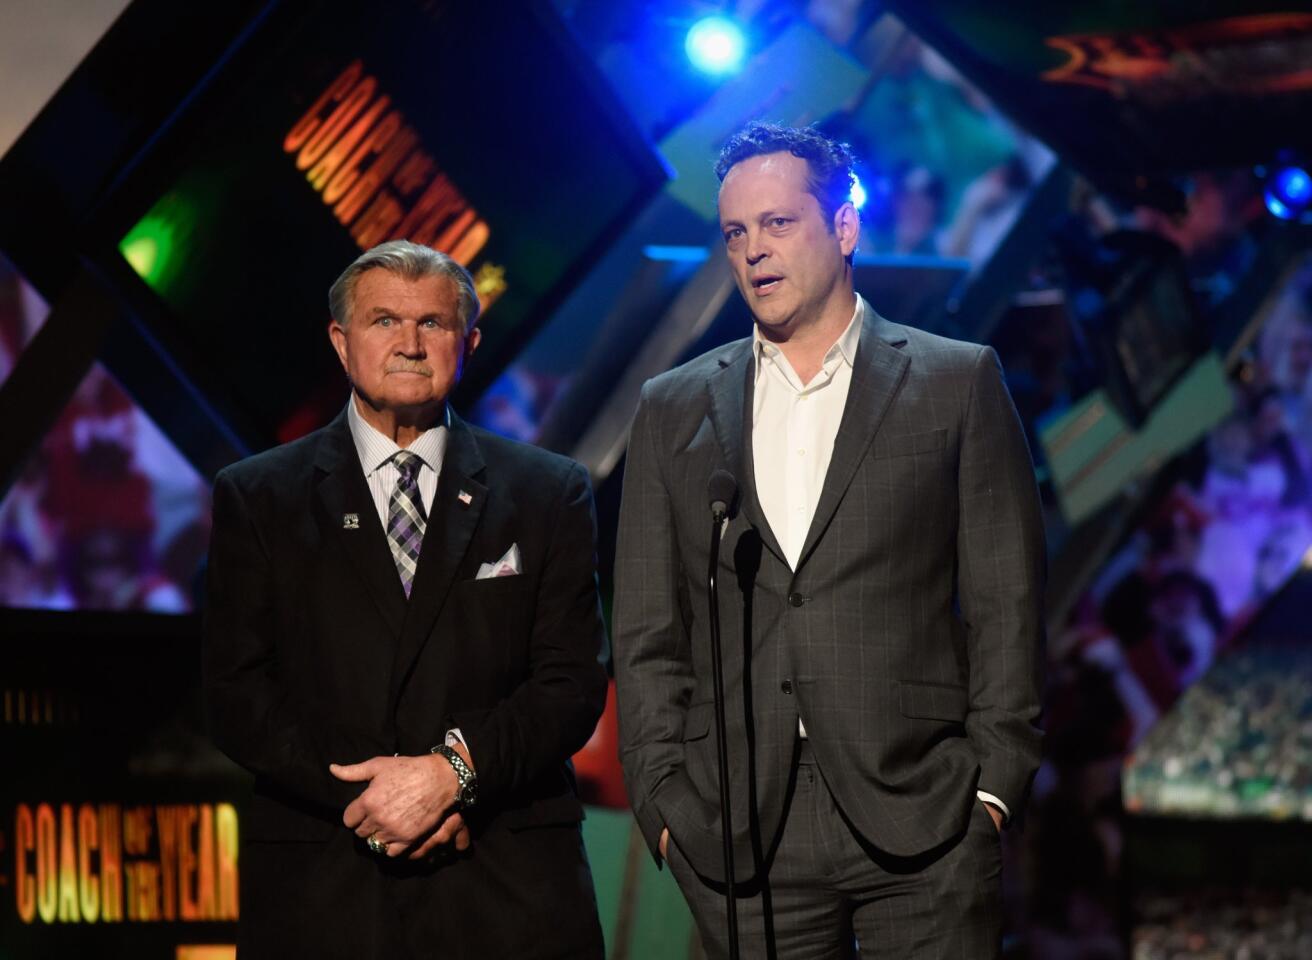 Mike Ditka and actor Vince Vaughn speak onstage during the 5th Annual NFL Honors at Bill Graham Civic Auditorium on February 6, 2016, in San Francisco.